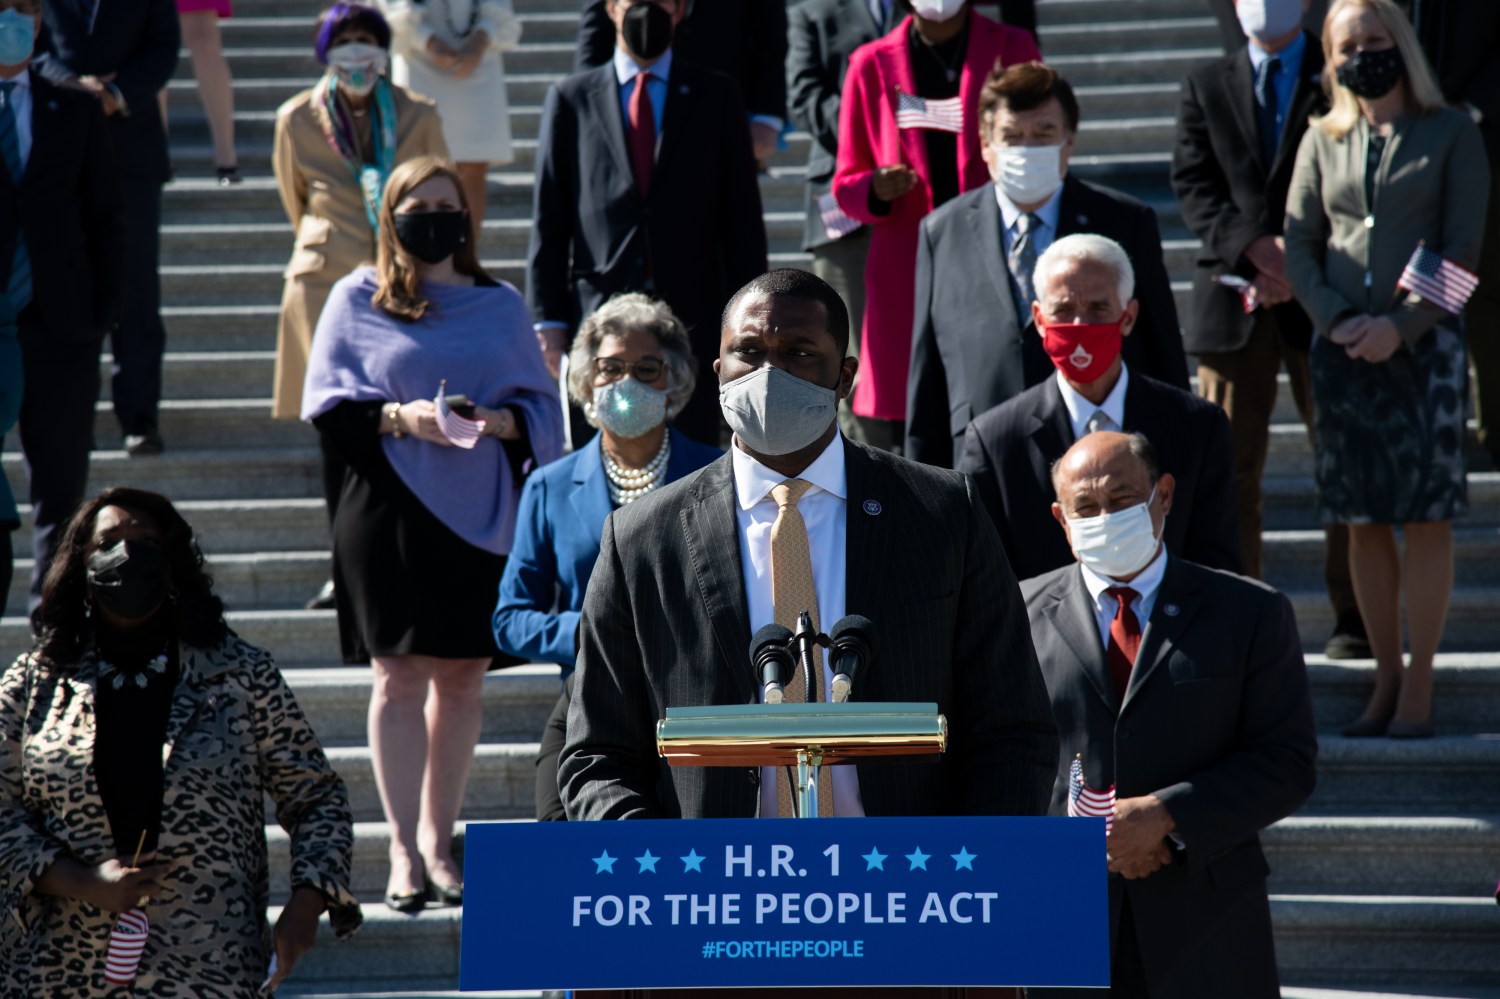 Representative Mondaire Jones (D-NY) during a press conference about H.R. 1 at the U.S. Capitol, in Washington, D.C., on Wednesday March 3, 2021. Today the House will vote on H.R. 1, the For the People Act of 2021, an election reform bill pushed by Democrats, as Congressional negotiations over additional COVID relief continue. (Graeme Sloan/Sipa USA)No Use Germany.